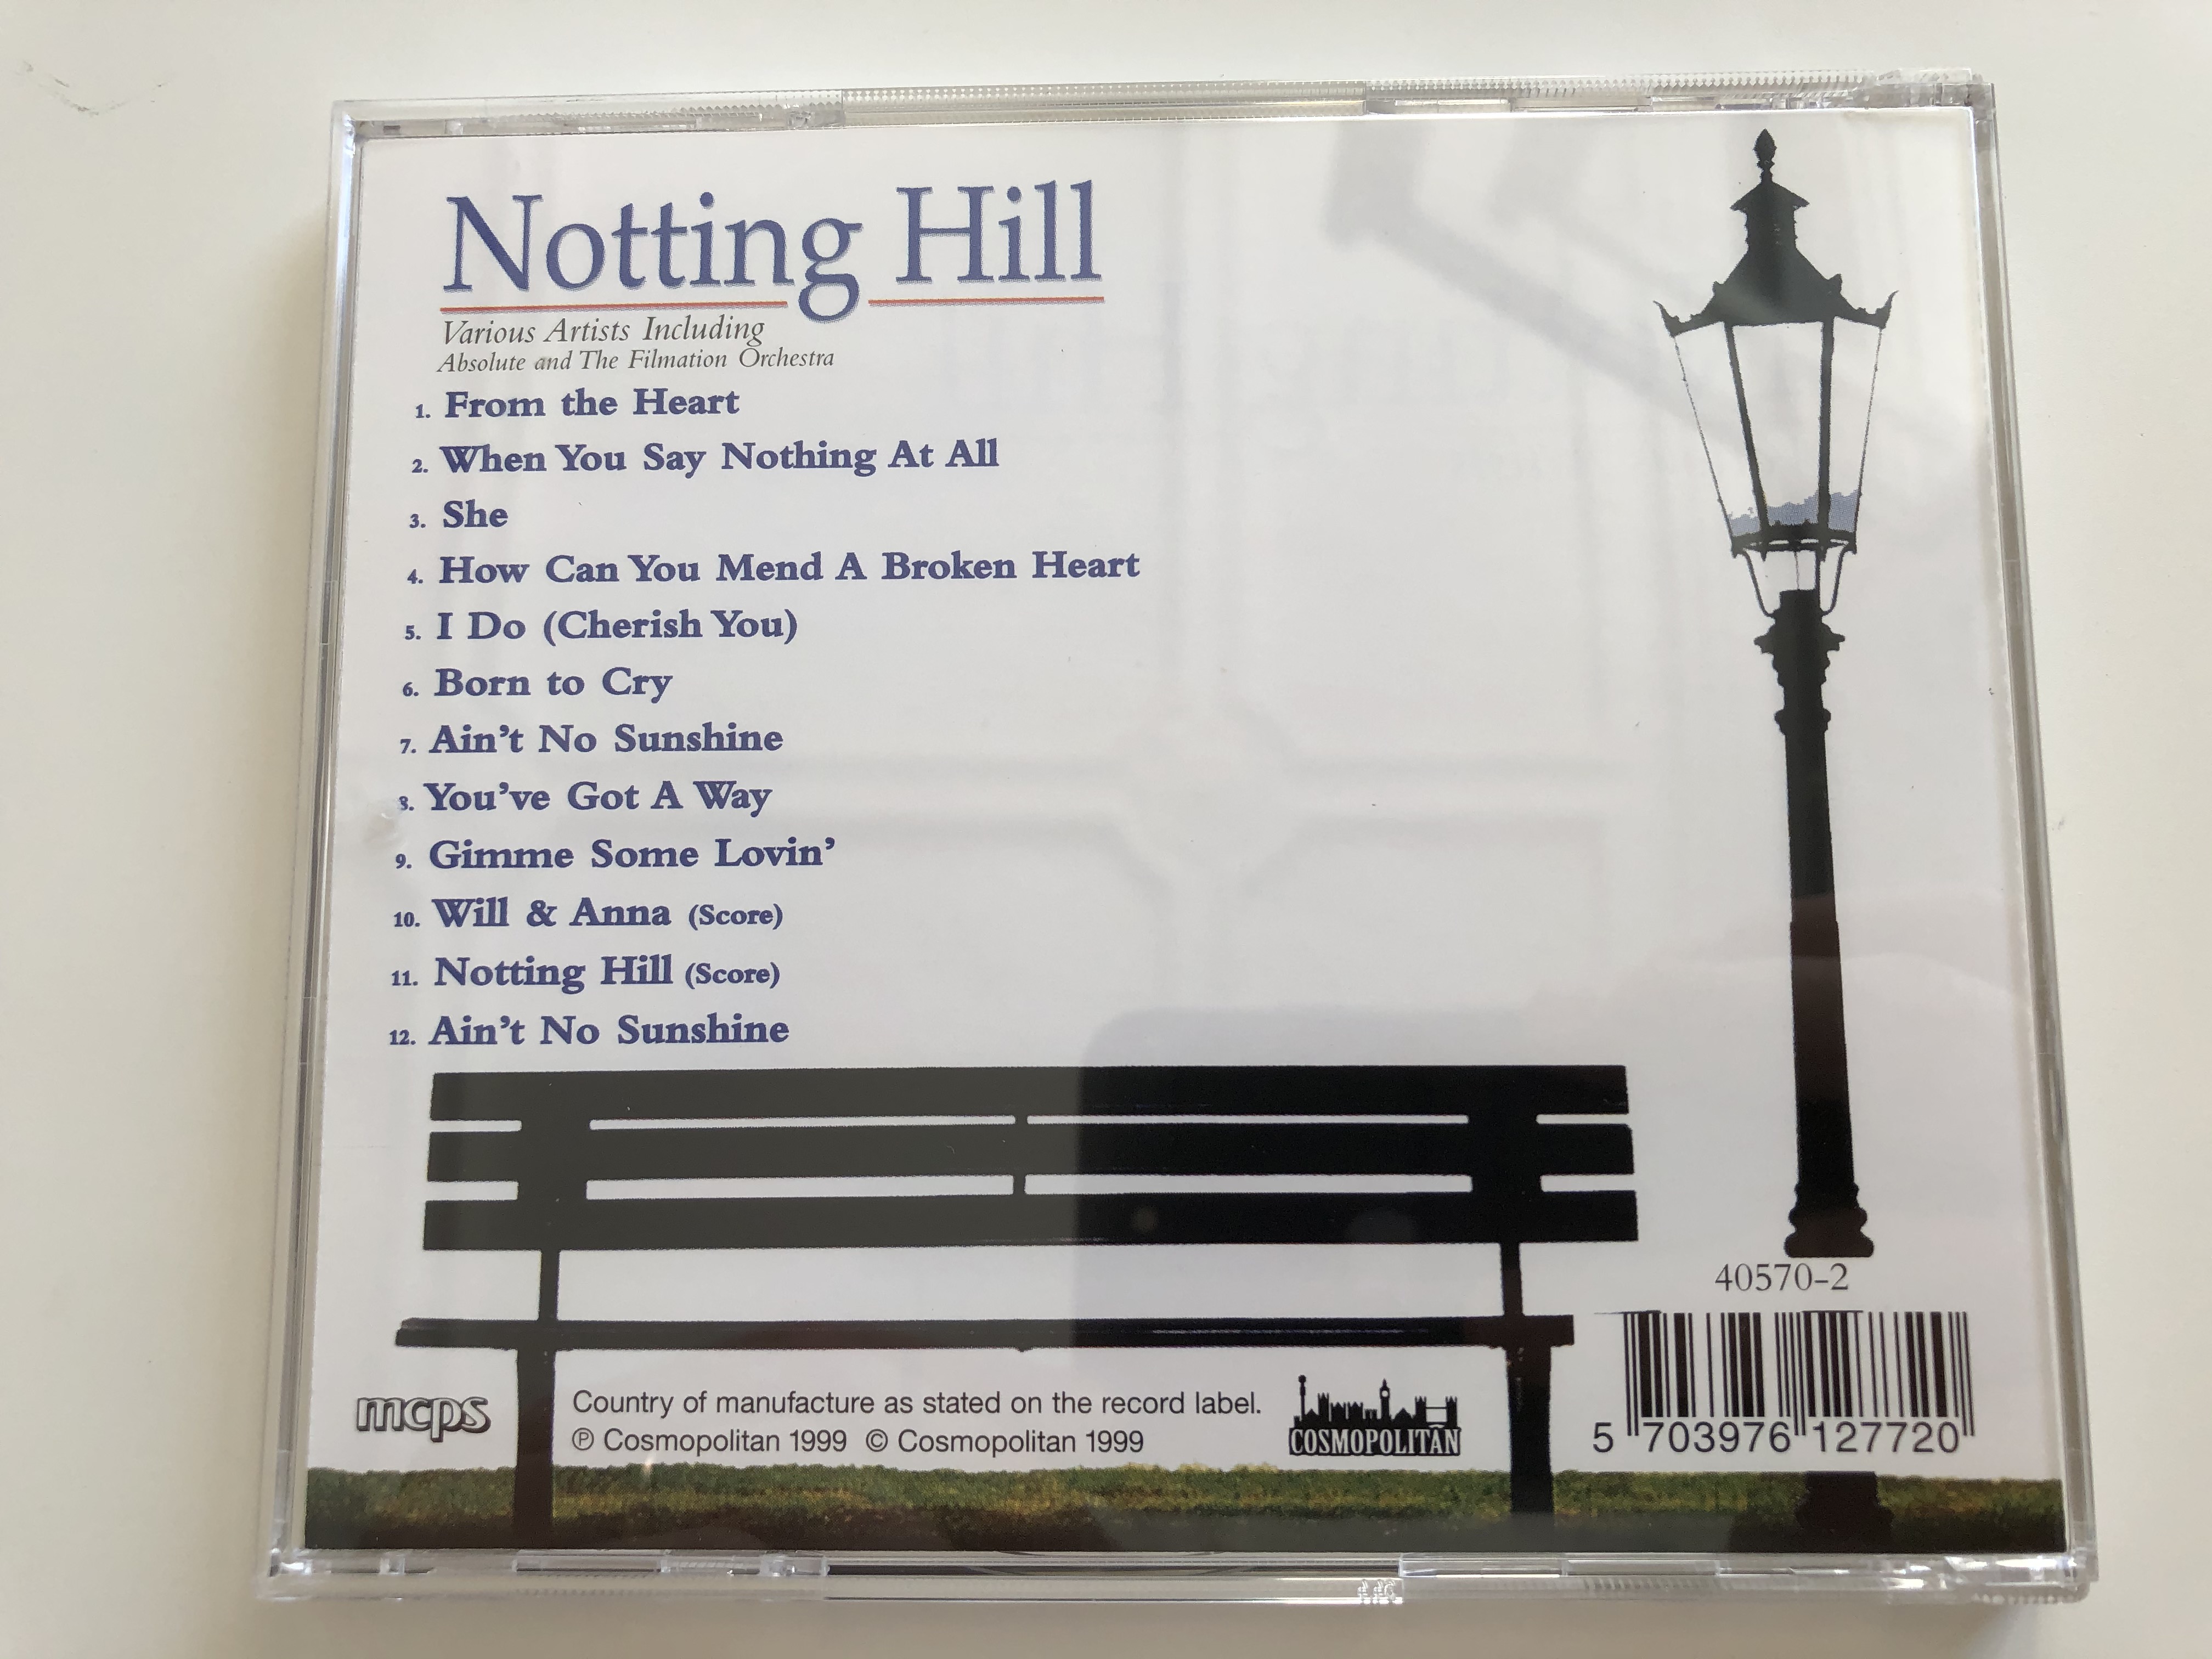 notting-hill-various-artists-including-absolute-and-the-filmation-orchestra-featuring-she-from-the-heart-how-can-you-mend-a-broken-heart-born-to-cry-nothing-hill-and-many-more-cosmopolit-4-.jpg